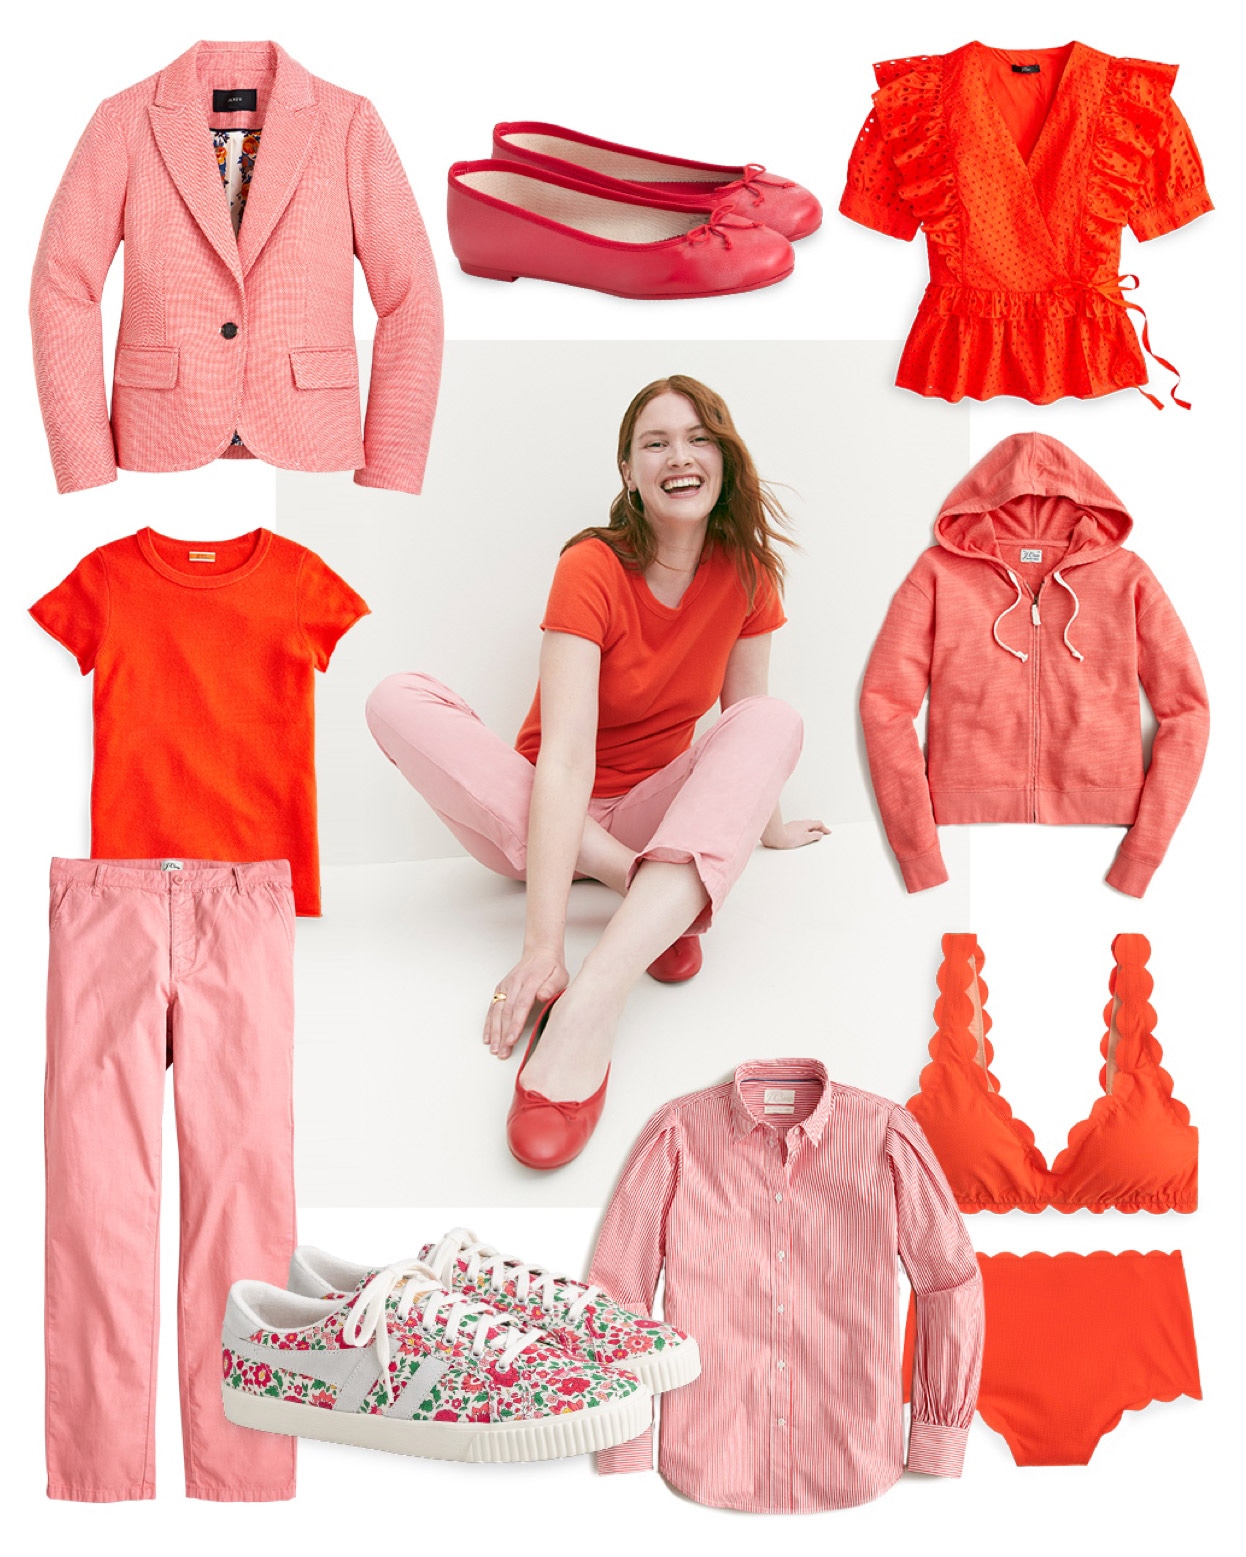 The Edit: Rosy Reds